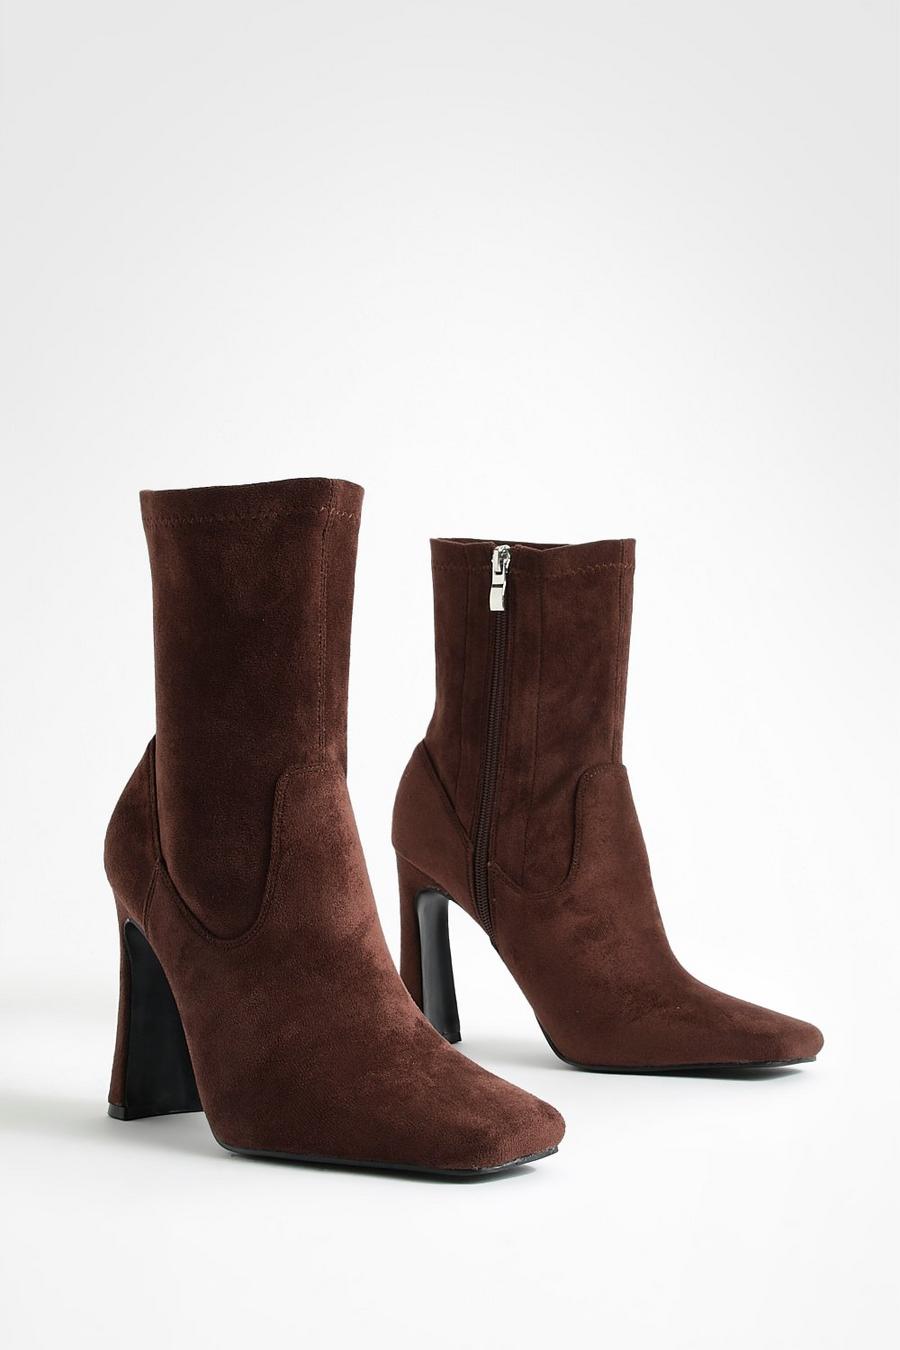 Chocolate brown Flare Heel Pointed Toe Sock Boots  